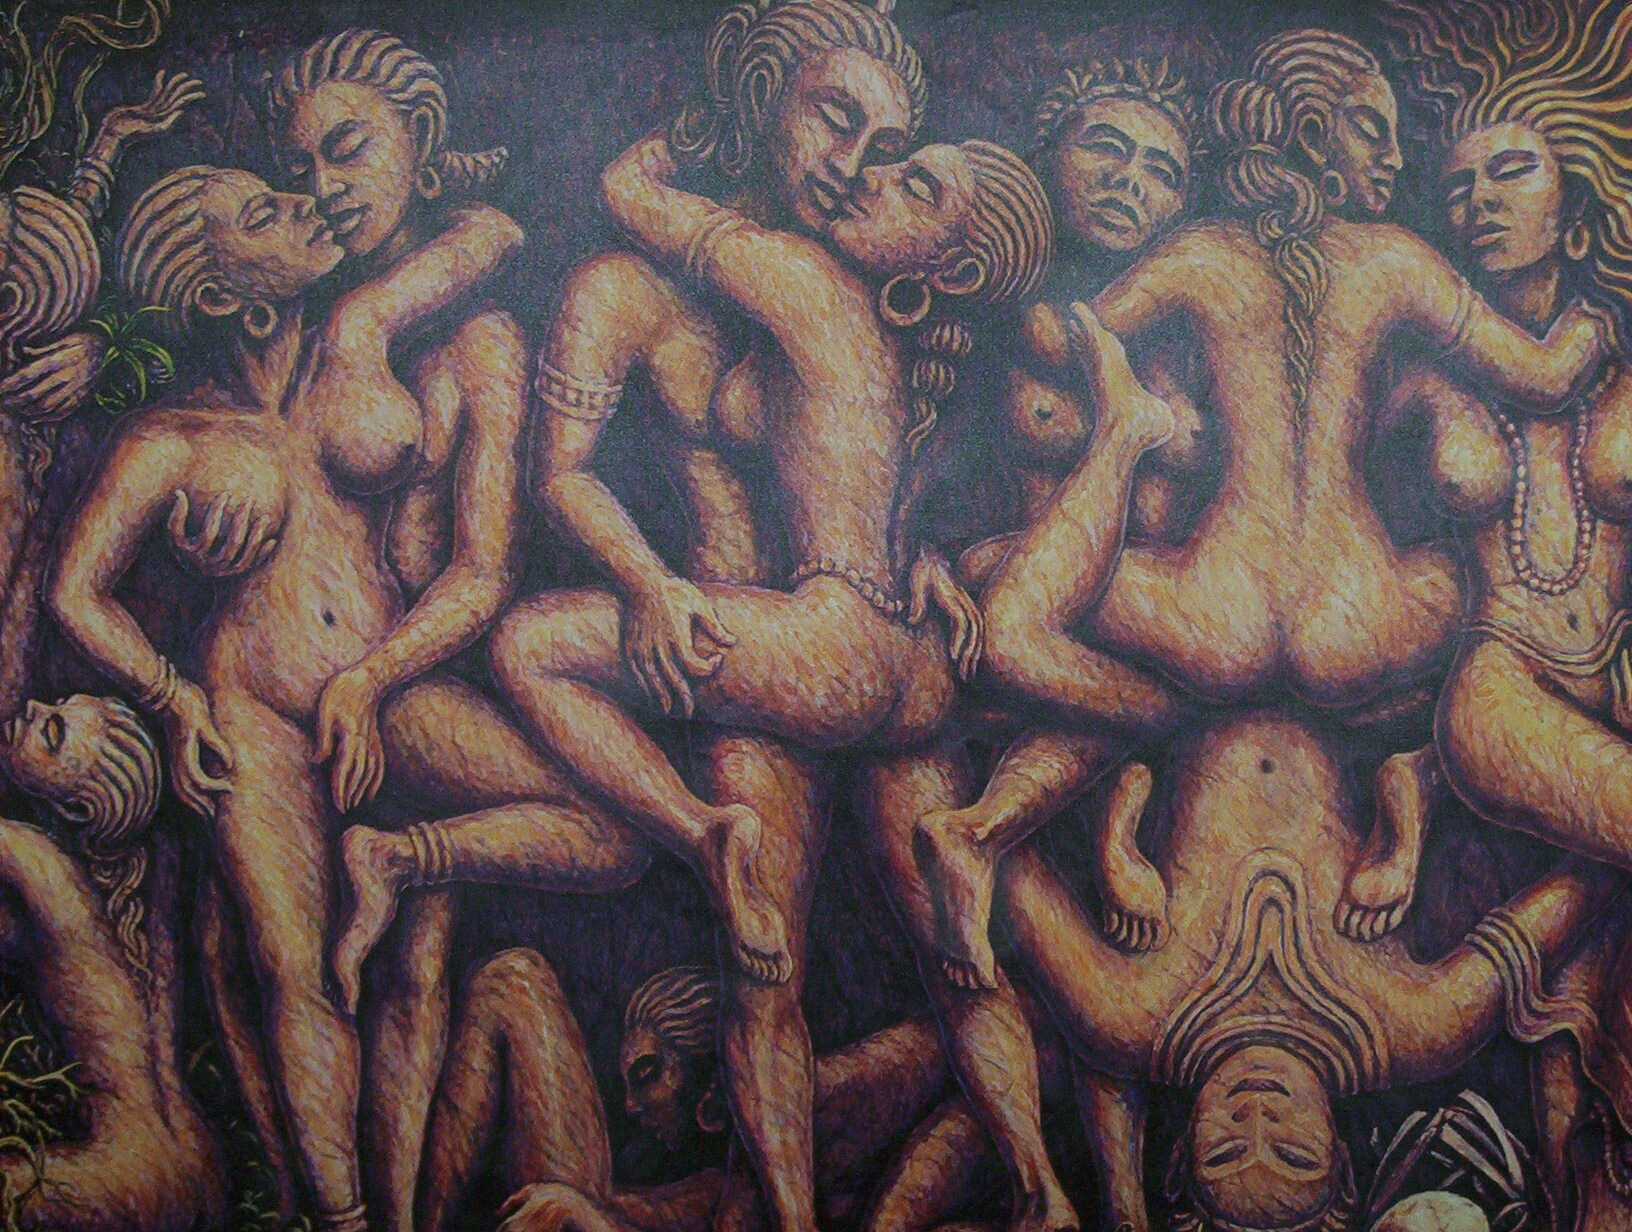 Group Sex Painting